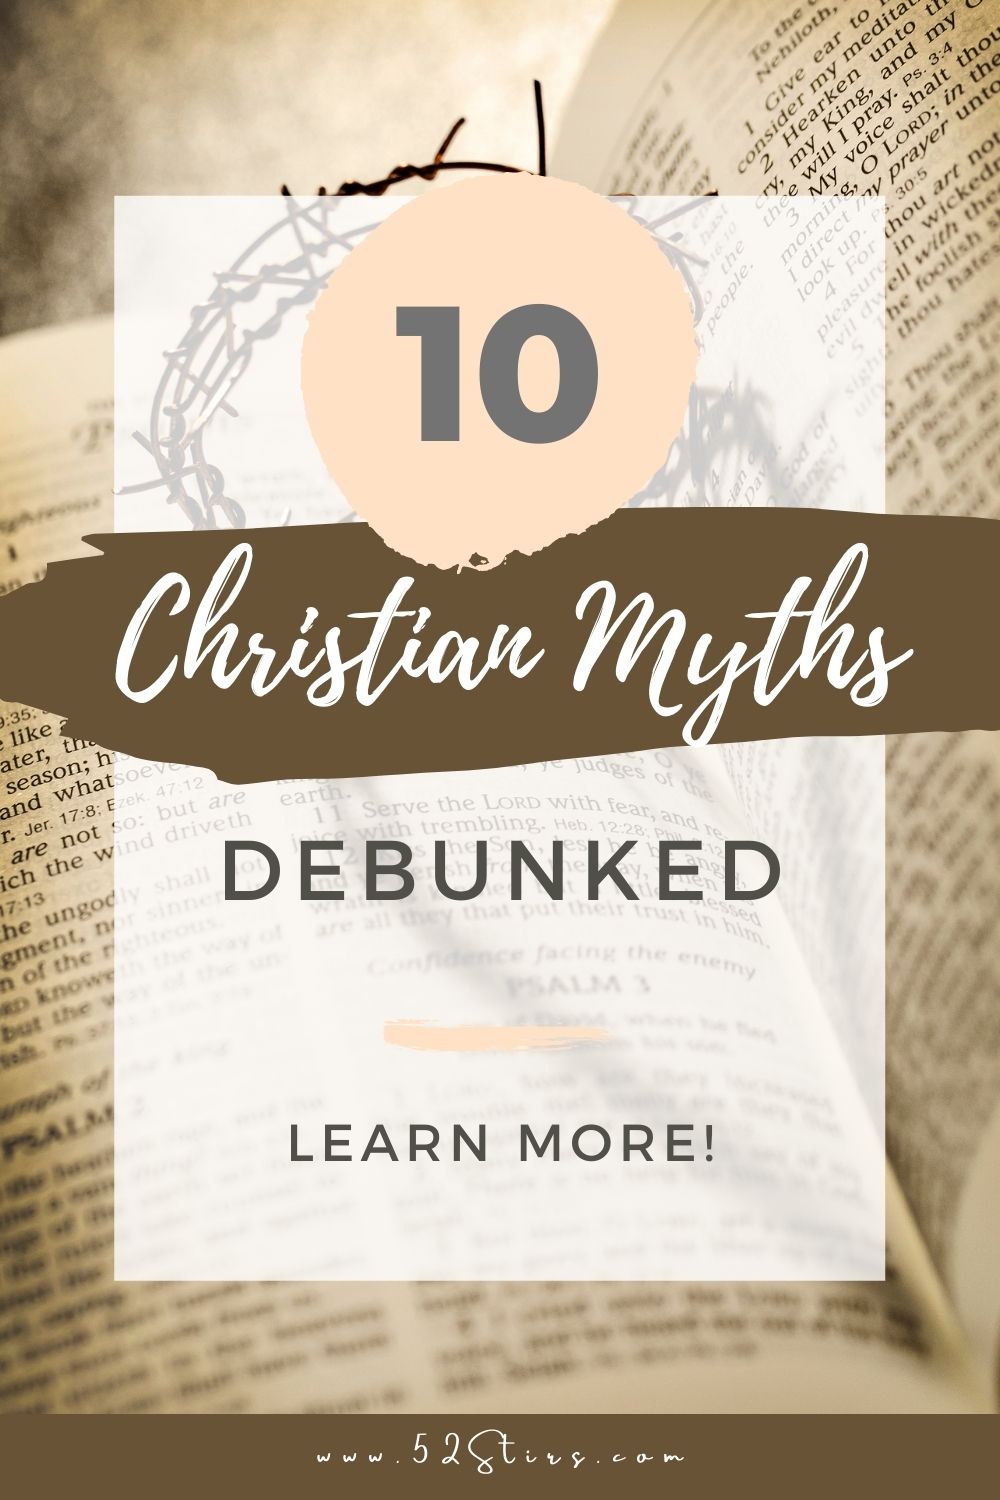 10 Myths about Christians and Christianity - 52StirsLounge